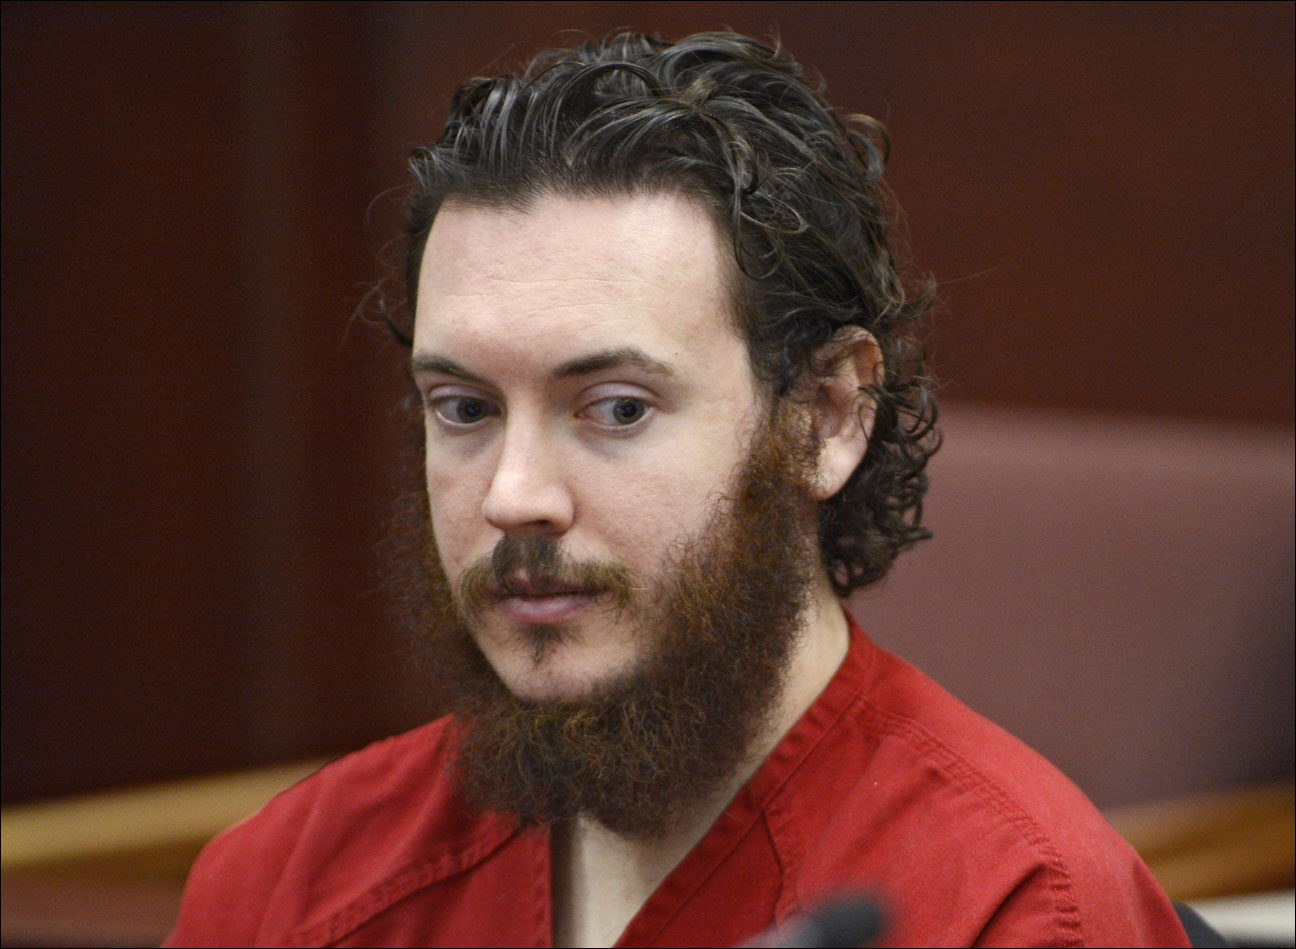 Aurora theater shooting suspect James Holmes in court in Centennial, Colo. Holmes is scheduled Tuesday, June 25, 2013 at a hearing where the judge overseeing the Colorado theater shooting case will reconsider the timing of the trial and other proceedings. (AP Photo/The Denver Post, Andy Cross, Pool,File)